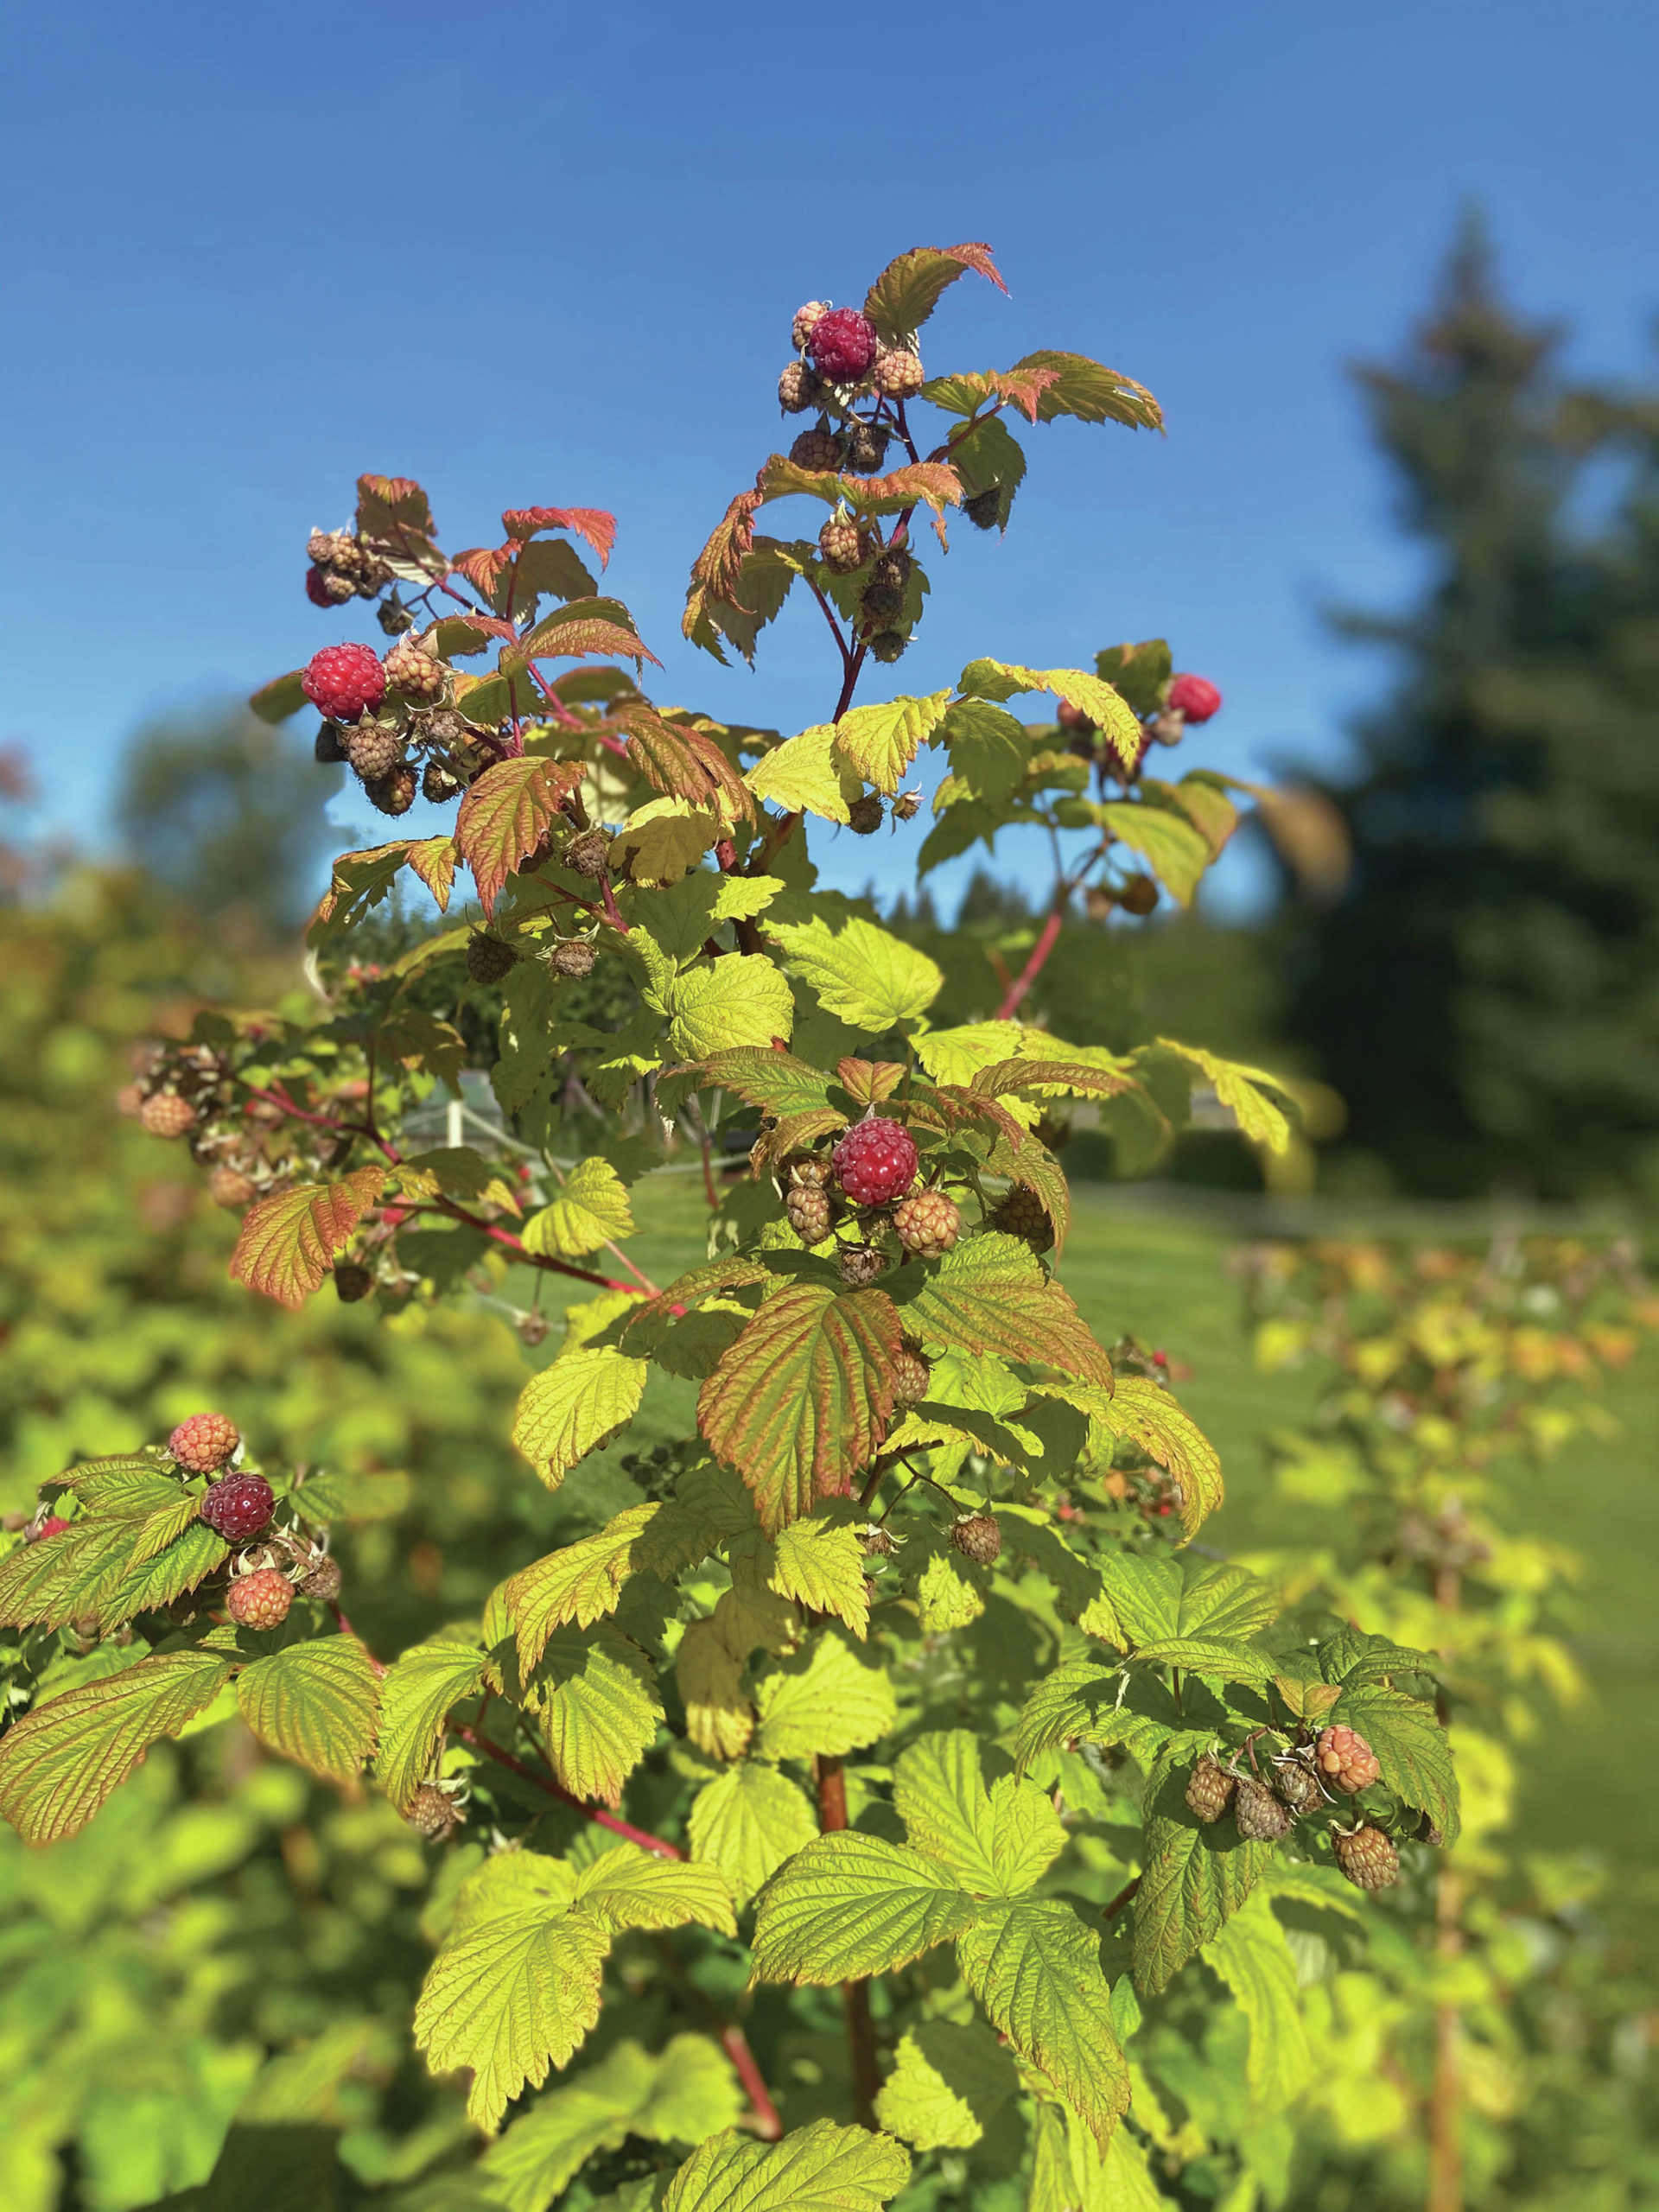 Fresh picked raspberries are an essential ingredient for a brown butter tart, as seen here on Aug. 20, 2020, on a bush in Homer, Alaska. (Photo by Teri Robl)